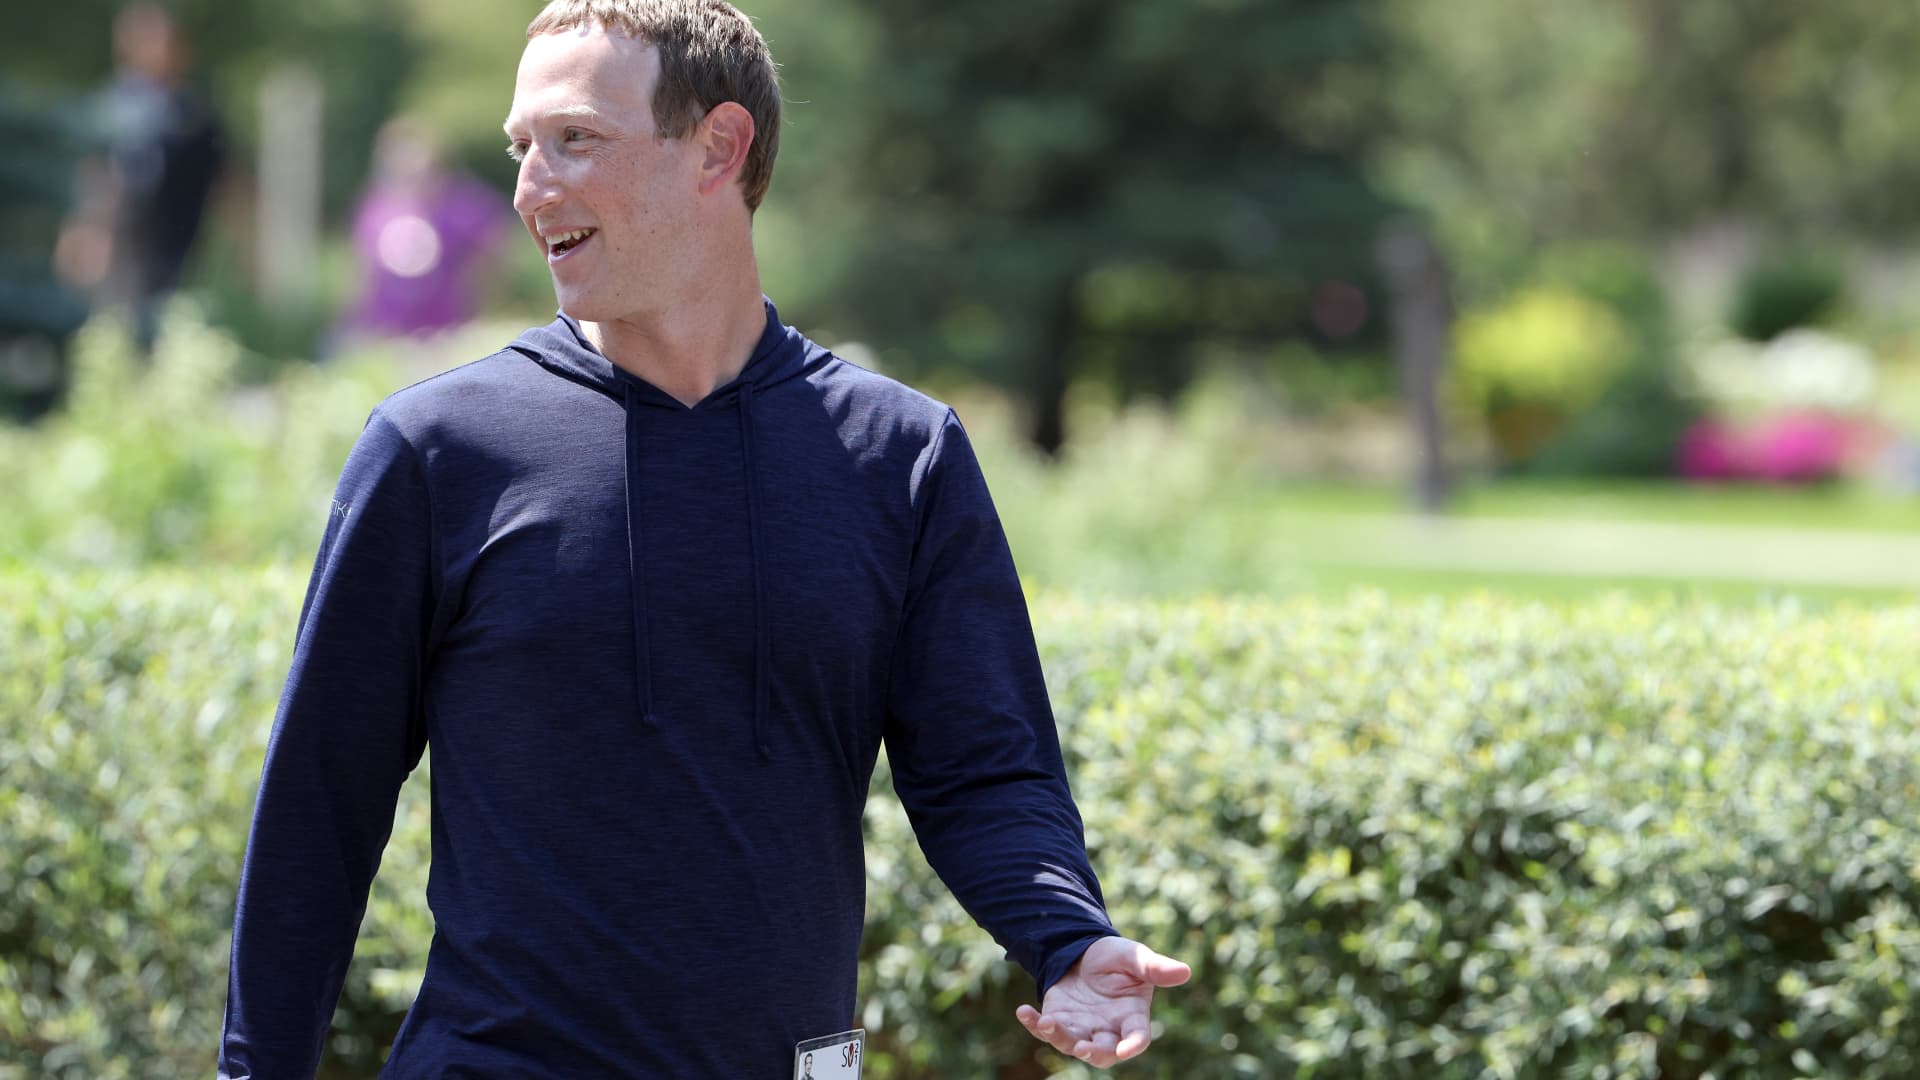 Facebook parent Meta reports third-quarter earnings after the bell Wednesday